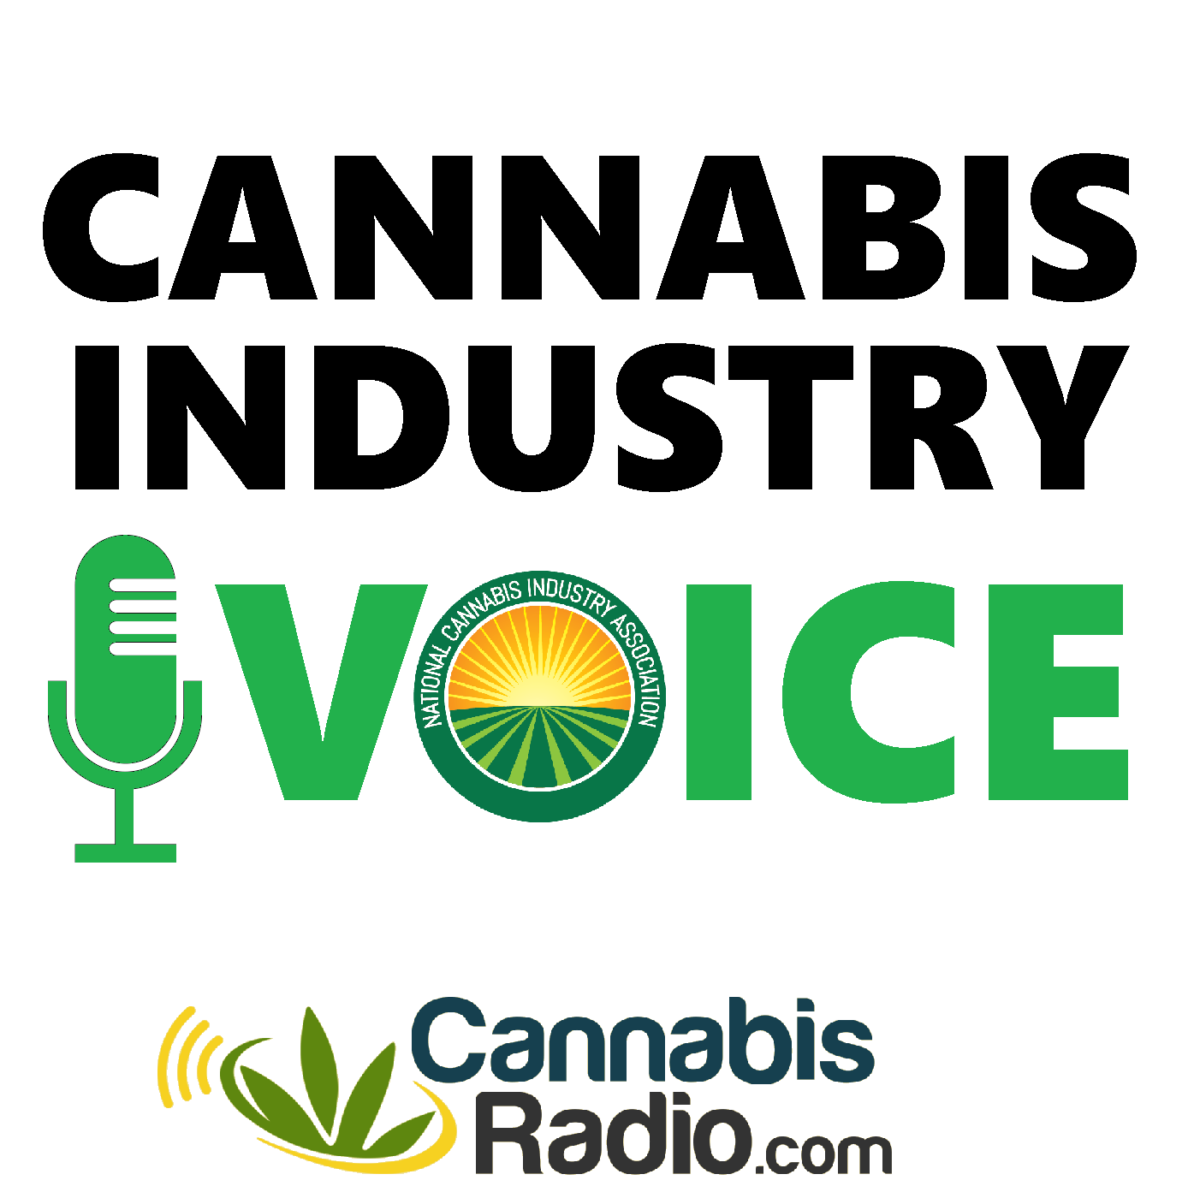 Differing Regulations For Cannabis Products Versus CBD/Hemp-Derived Products